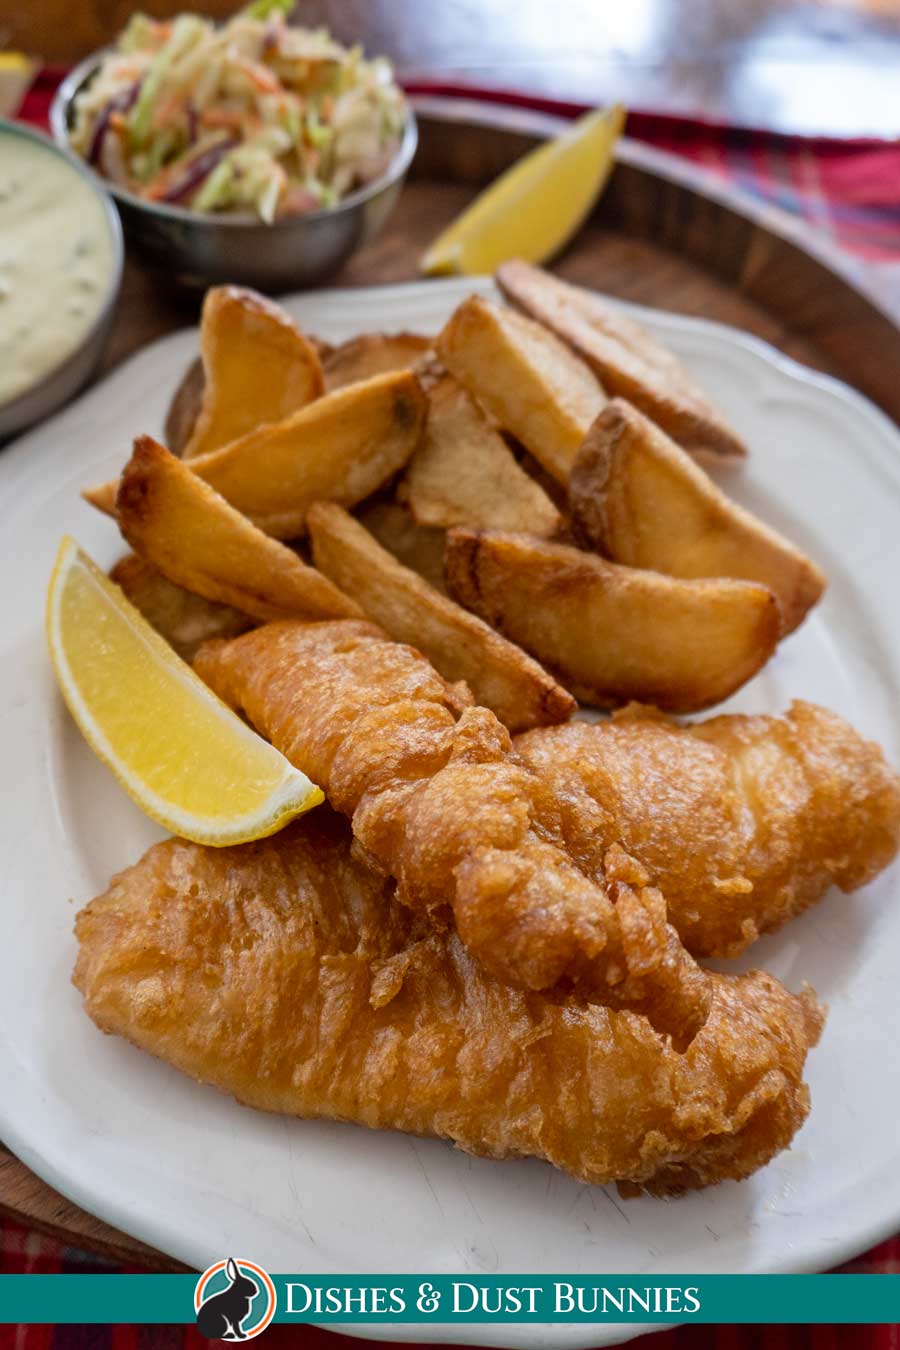 Crispy Beer Battered Fish (With or Without the Beer!)